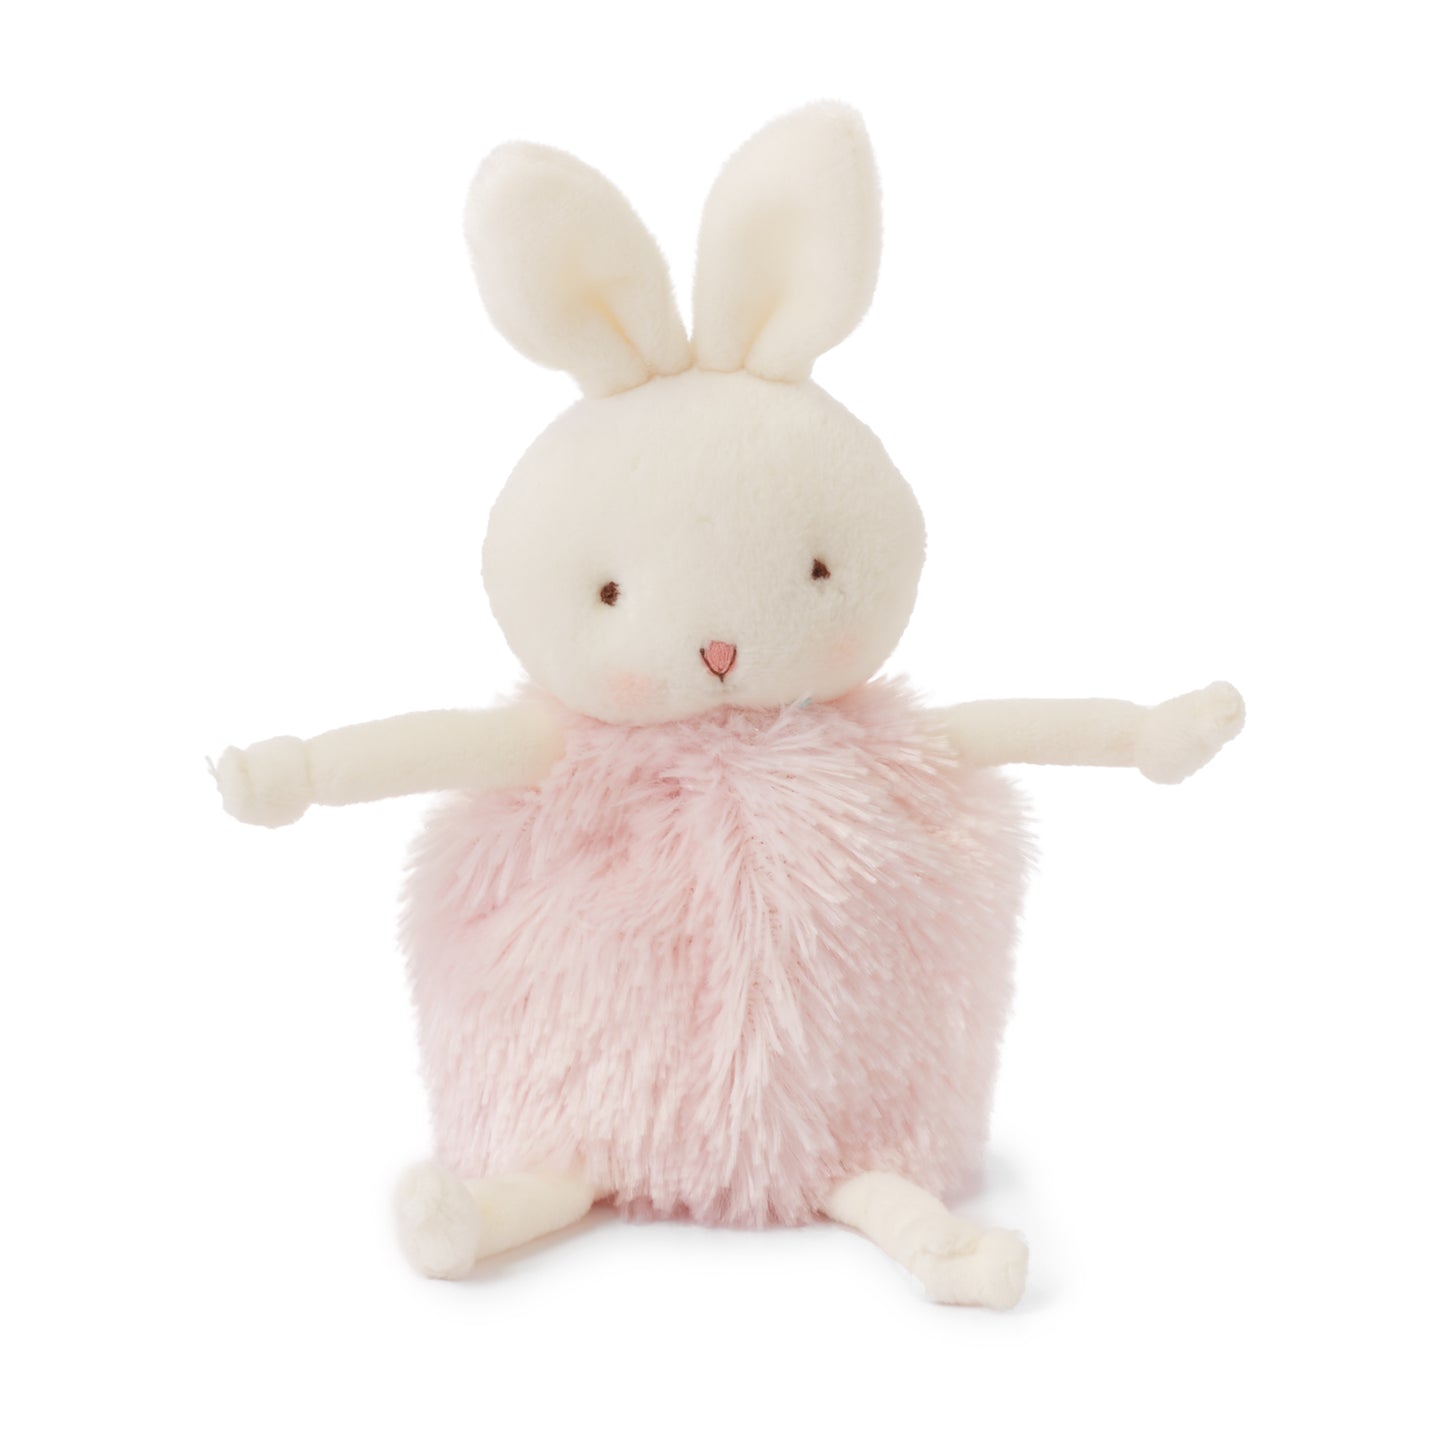 Roly Poly Blossom Pink Bunny 5" Plush